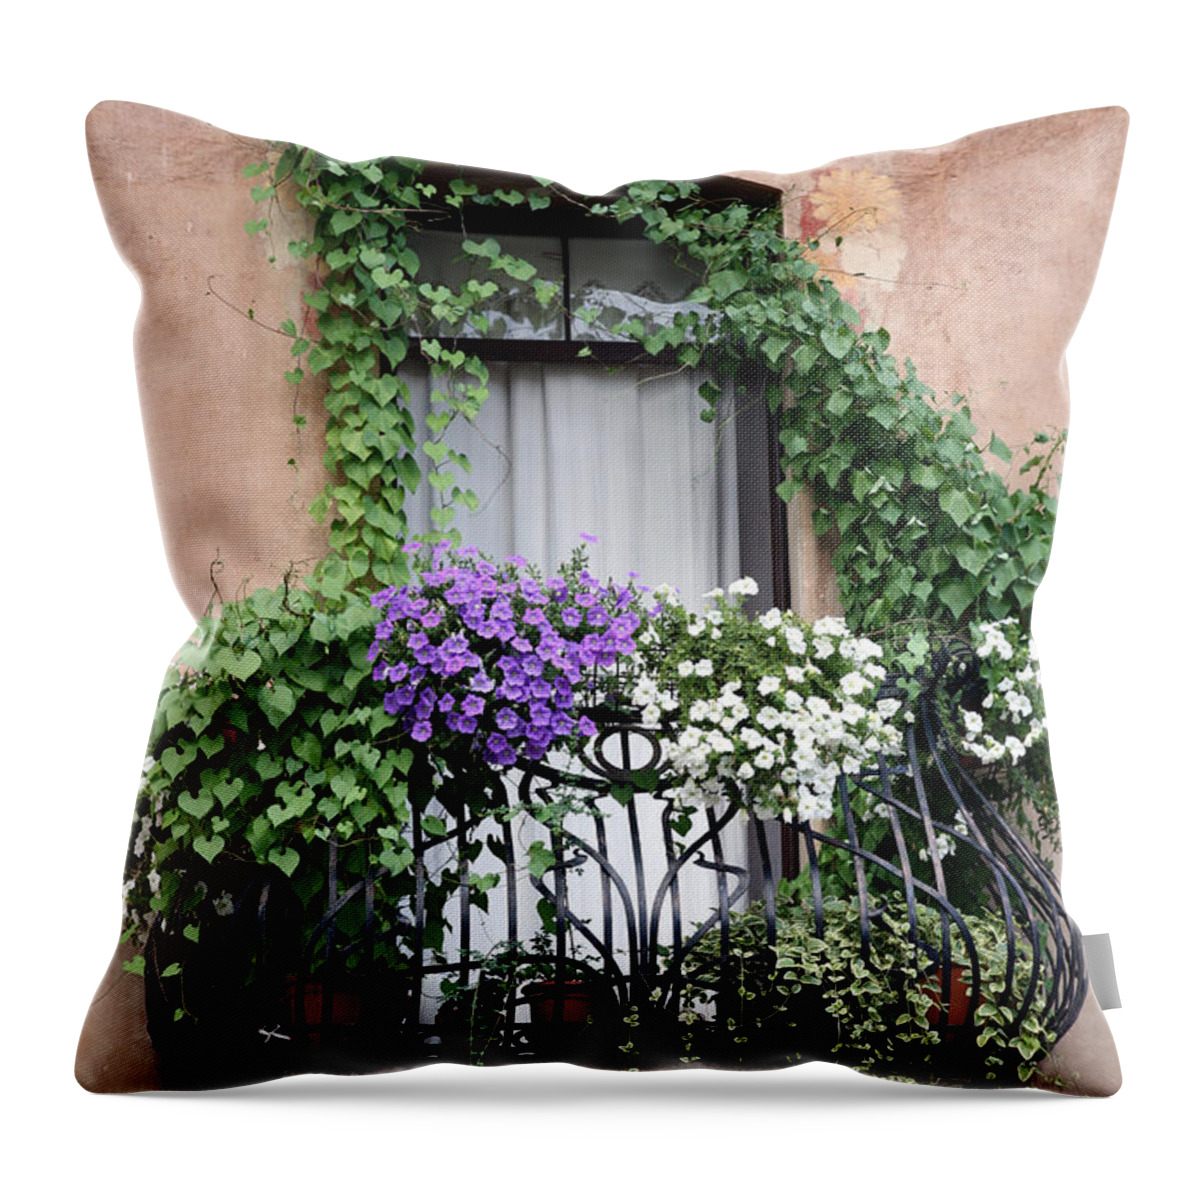 Windows And Doors Throw Pillow featuring the photograph Cascading Floral Balcony by Donna Corless